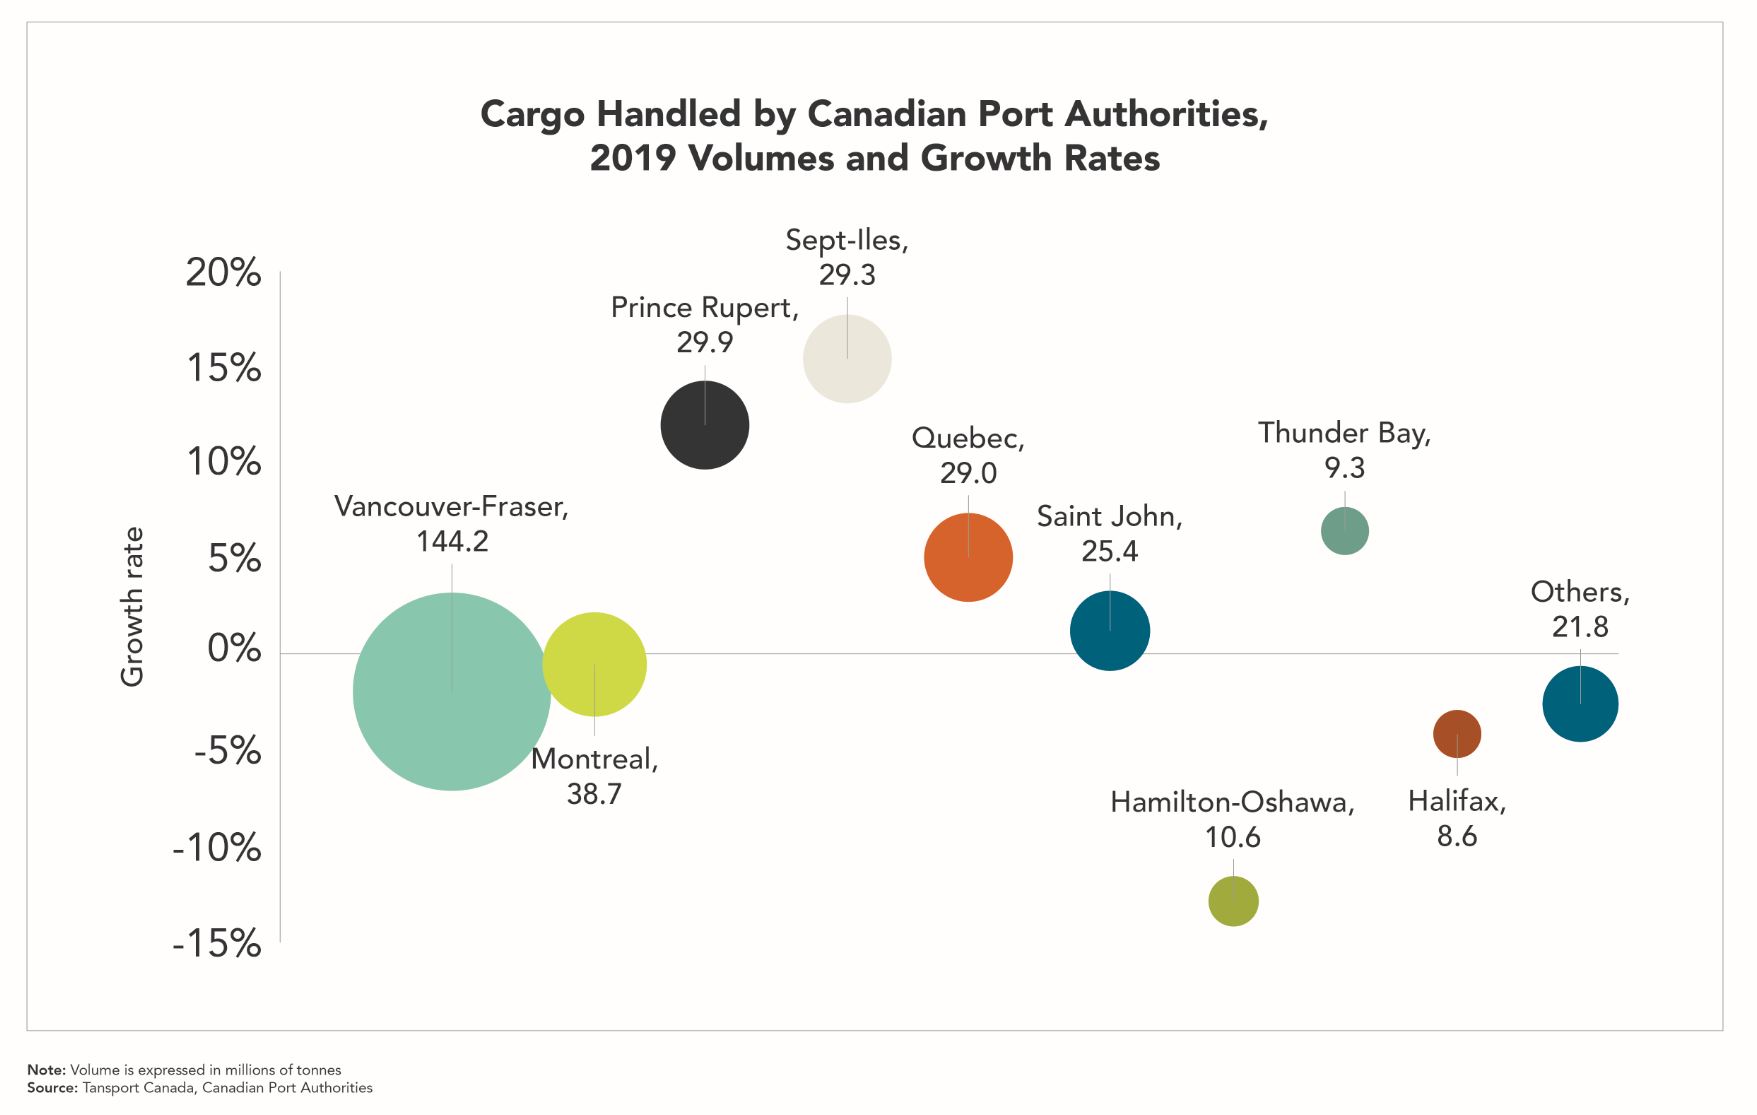 Cargo handled by Canadian Port Authorities, 2019 volumes and growth rates